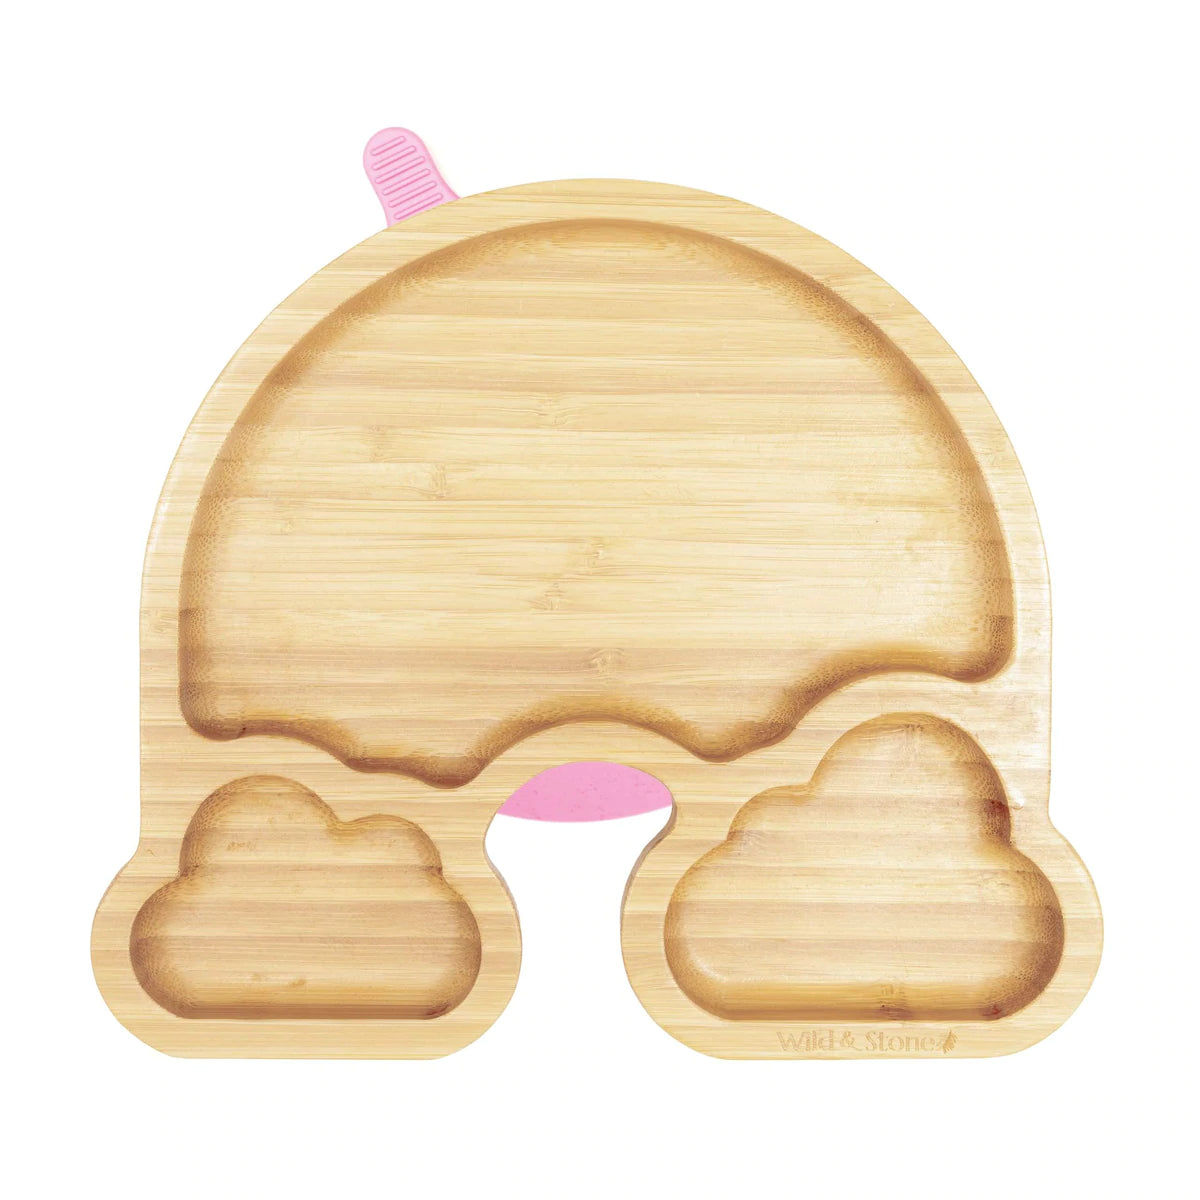 Wild & Stone Baby Weaning Suction Plate - Over The Rainbow (Pink)